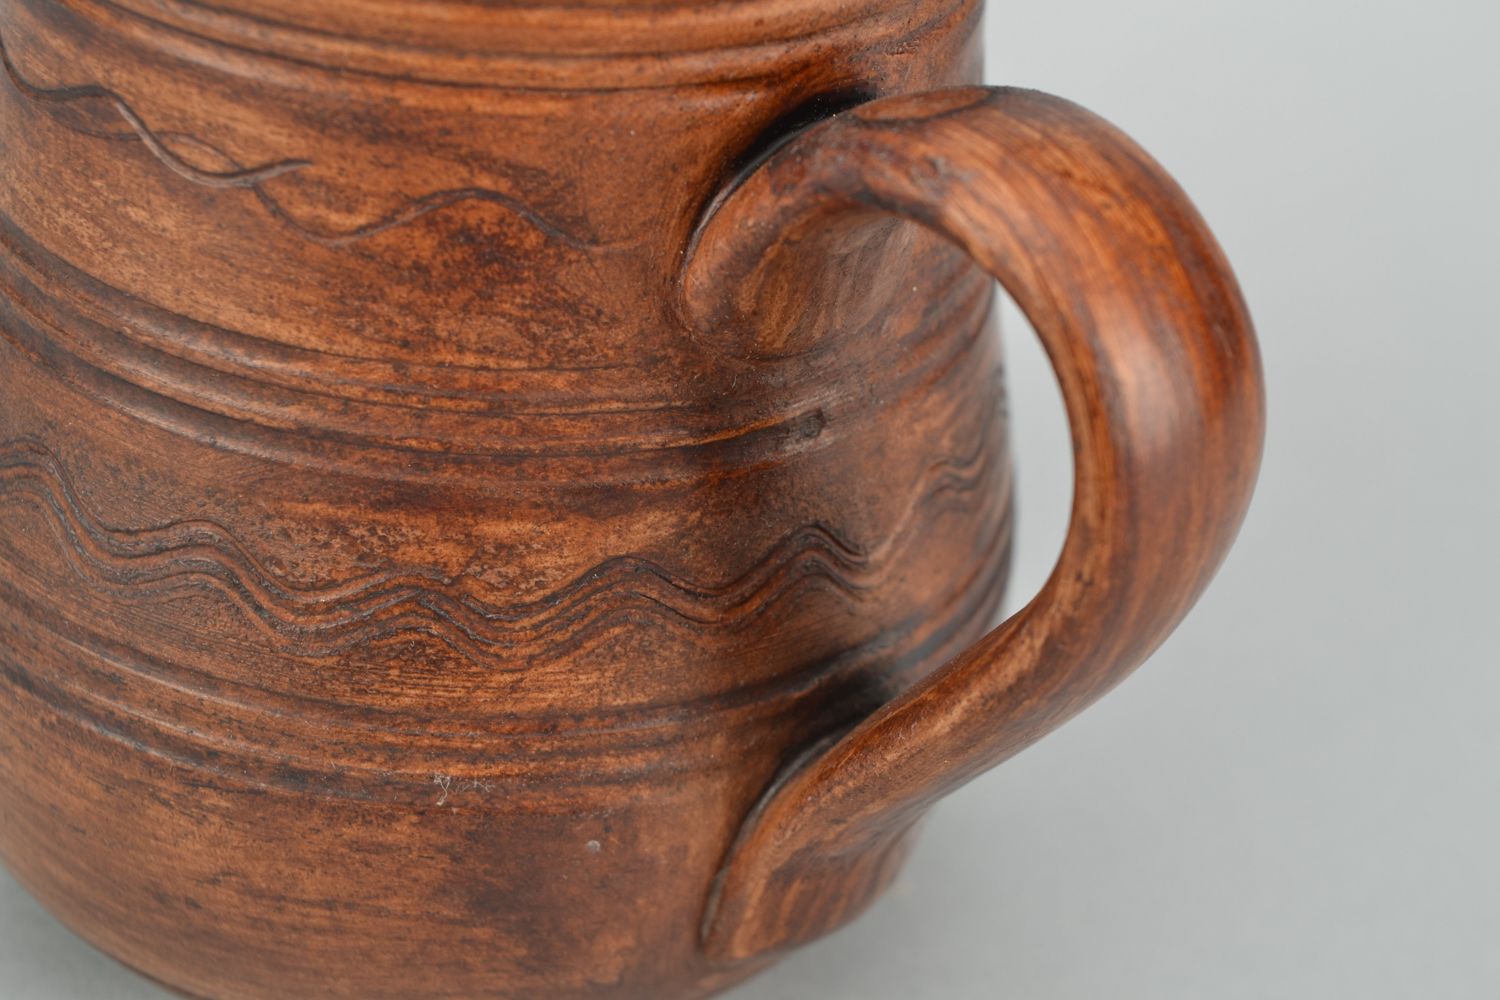 11 oz clay glazed coffee cup in rustic design with handle and no pattern photo 3